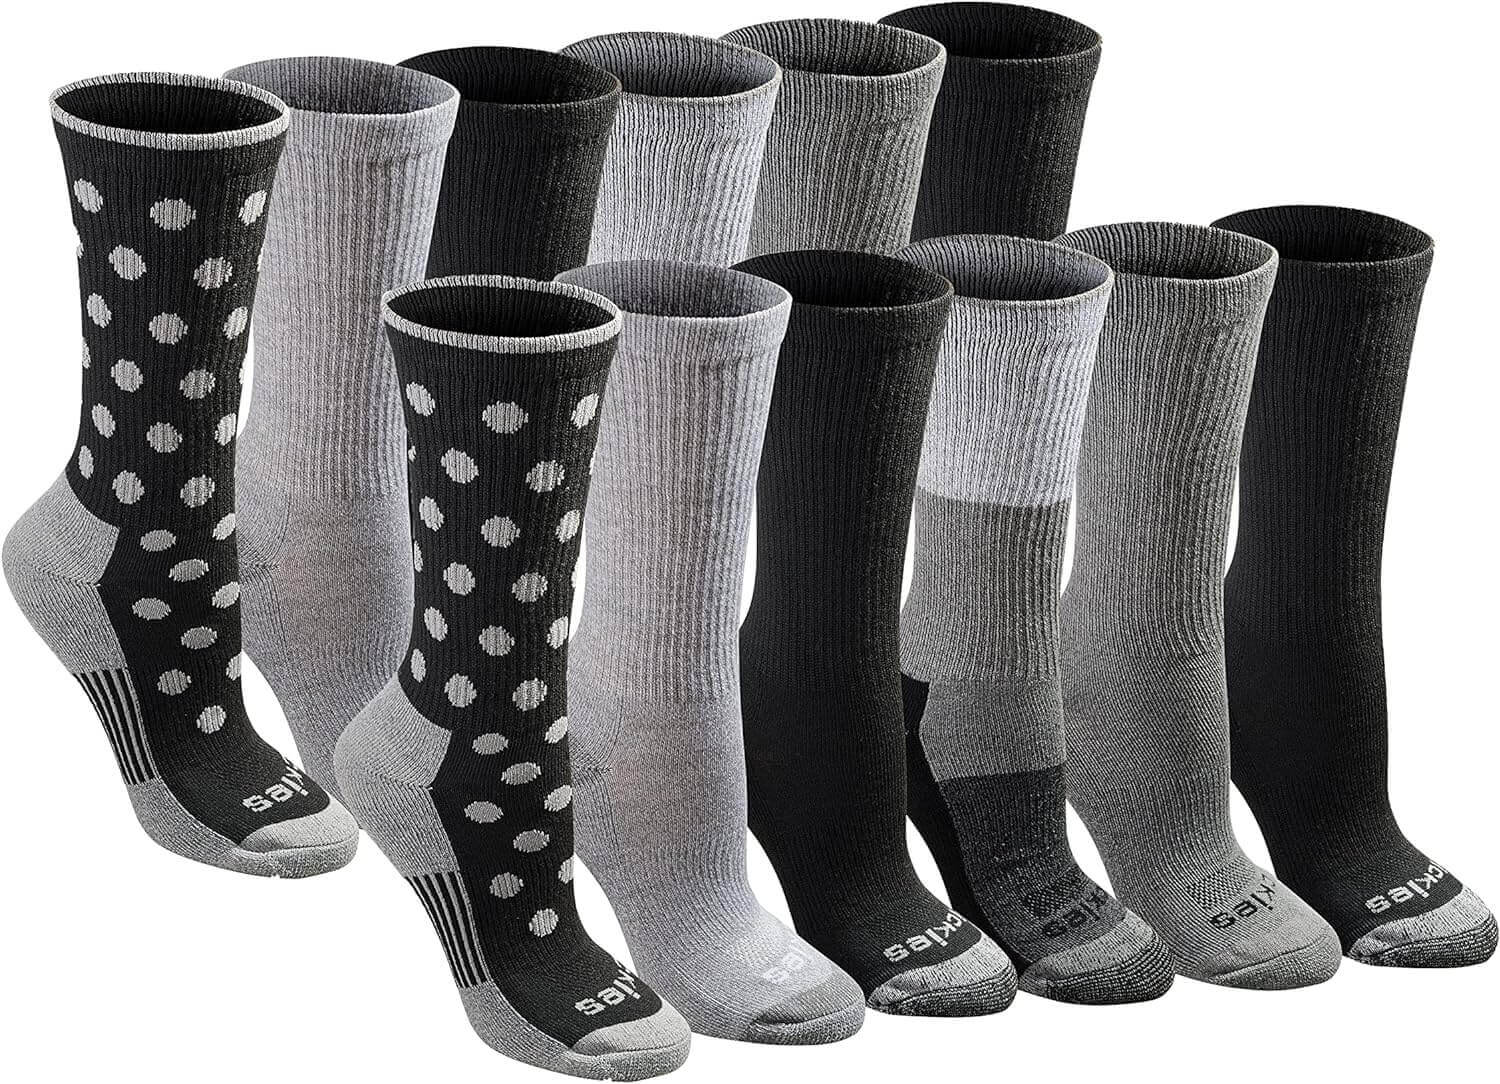 Shop The Latest >Women's Dri-tech Moisture Control Crew Socks Multipack > *Only $37.79*> From The Top Brand > *Dickiesl* > Shop Now and Get Free Shipping On Orders Over $45.00 >*Shop Earth Foot*